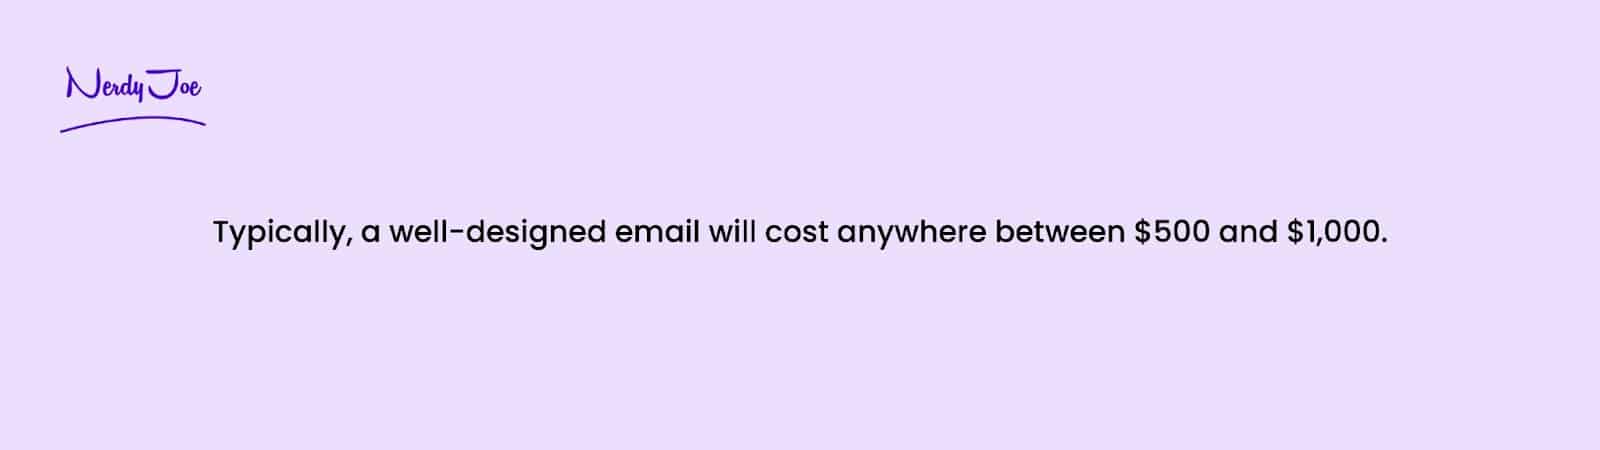 email design pricing